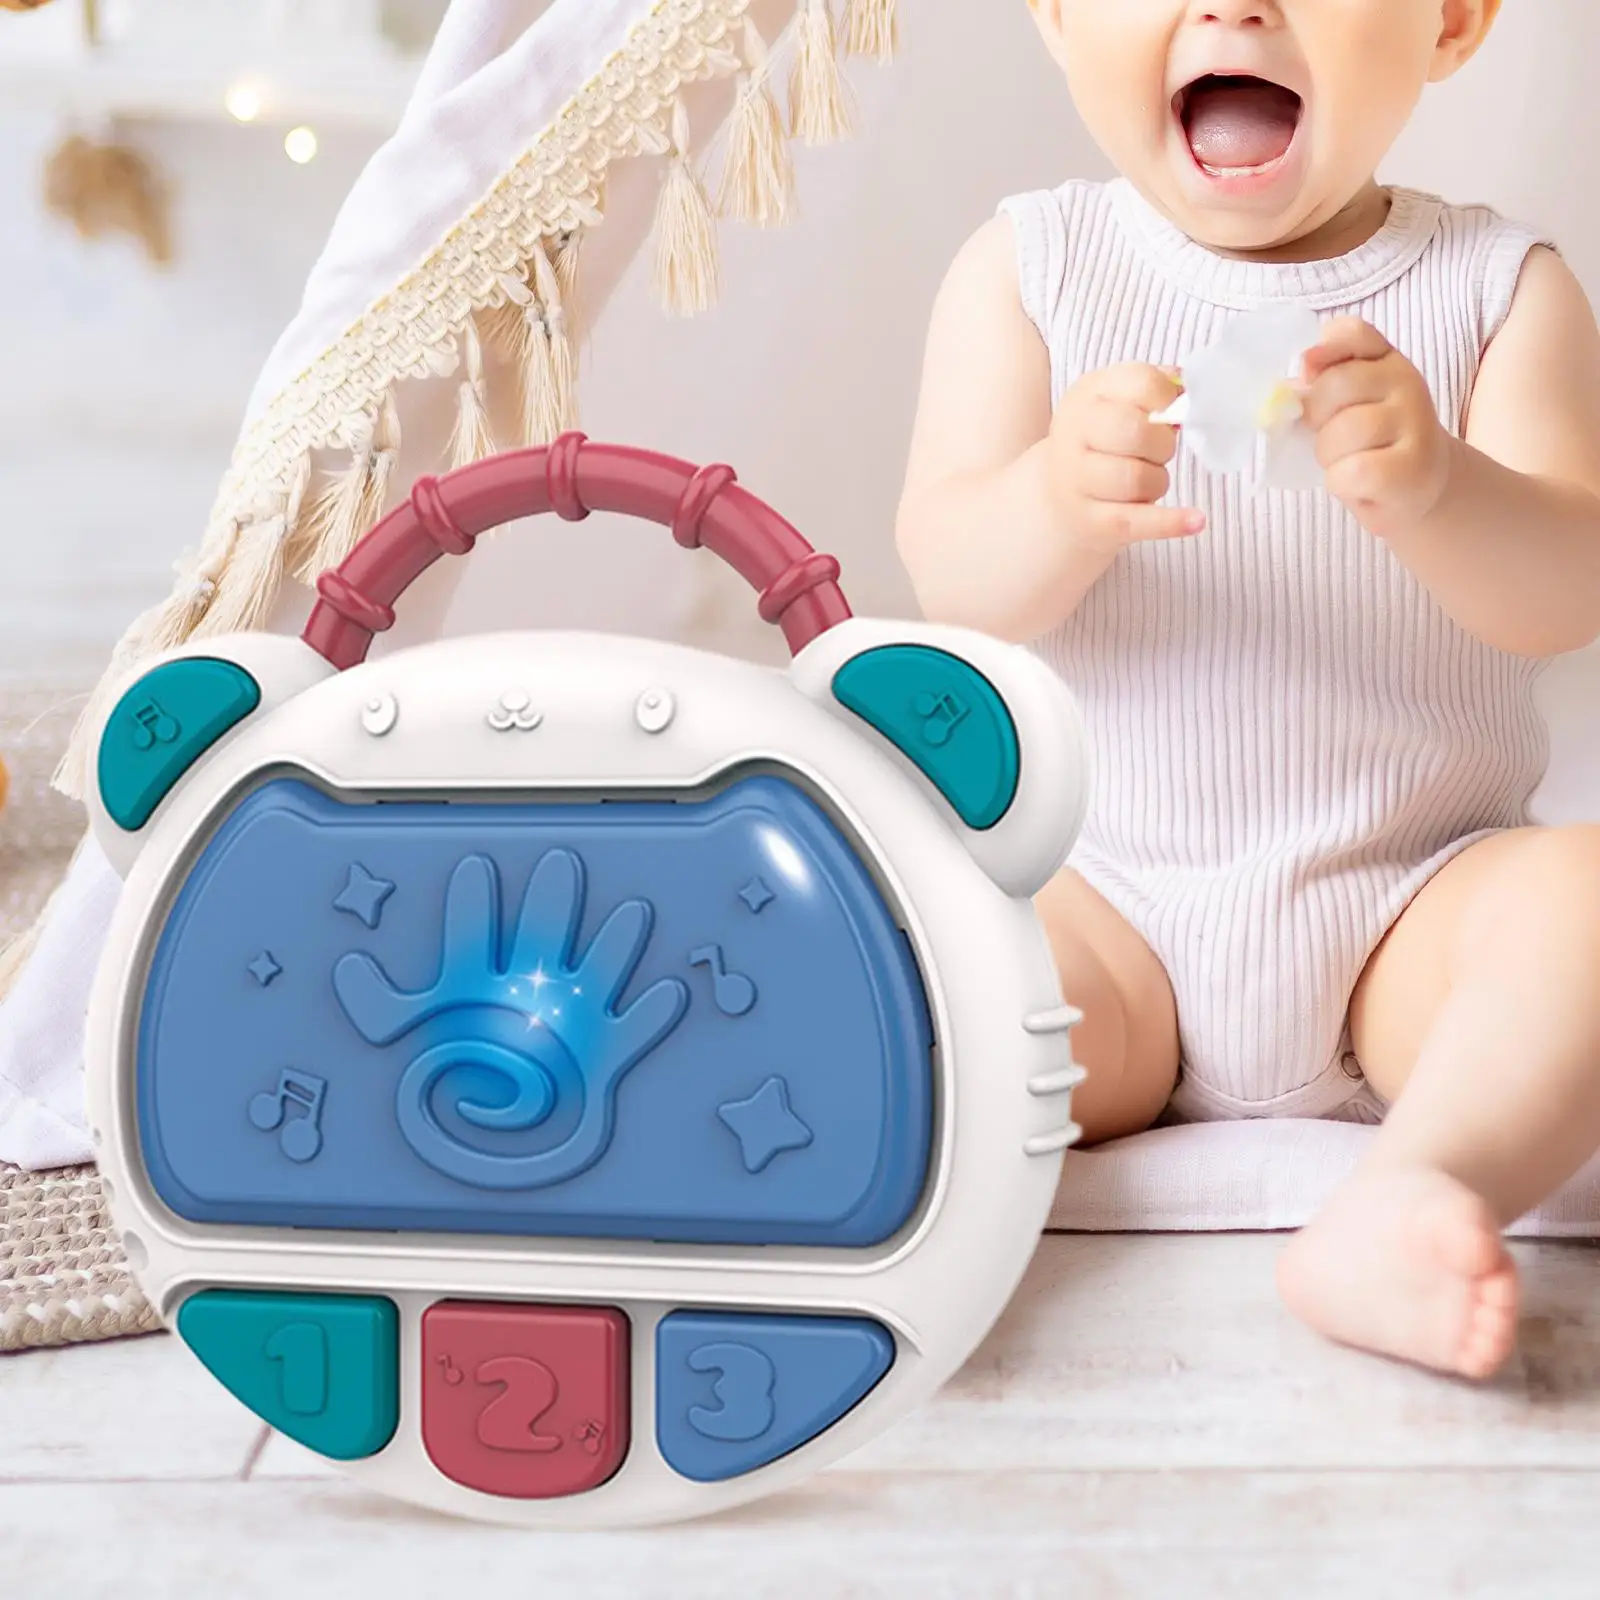 Babies Light up Drum Toys Multi Functions Baby Musical Drum Toy Hand Clapping Drum with Music Light for Girls Newborn